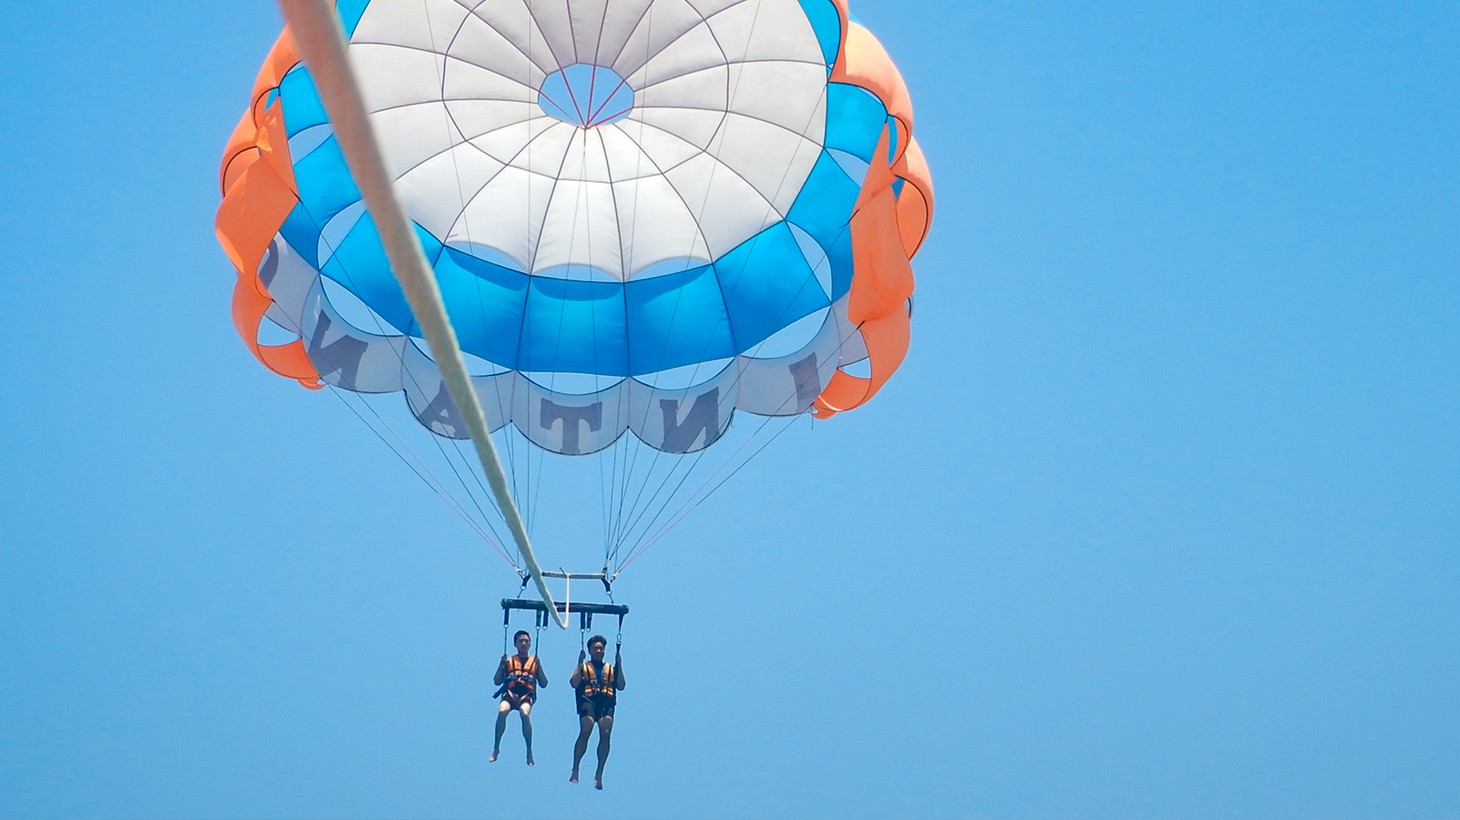 Bali Water Sport Combo Tour: Fly Board, Jet Ski, and Parasailing